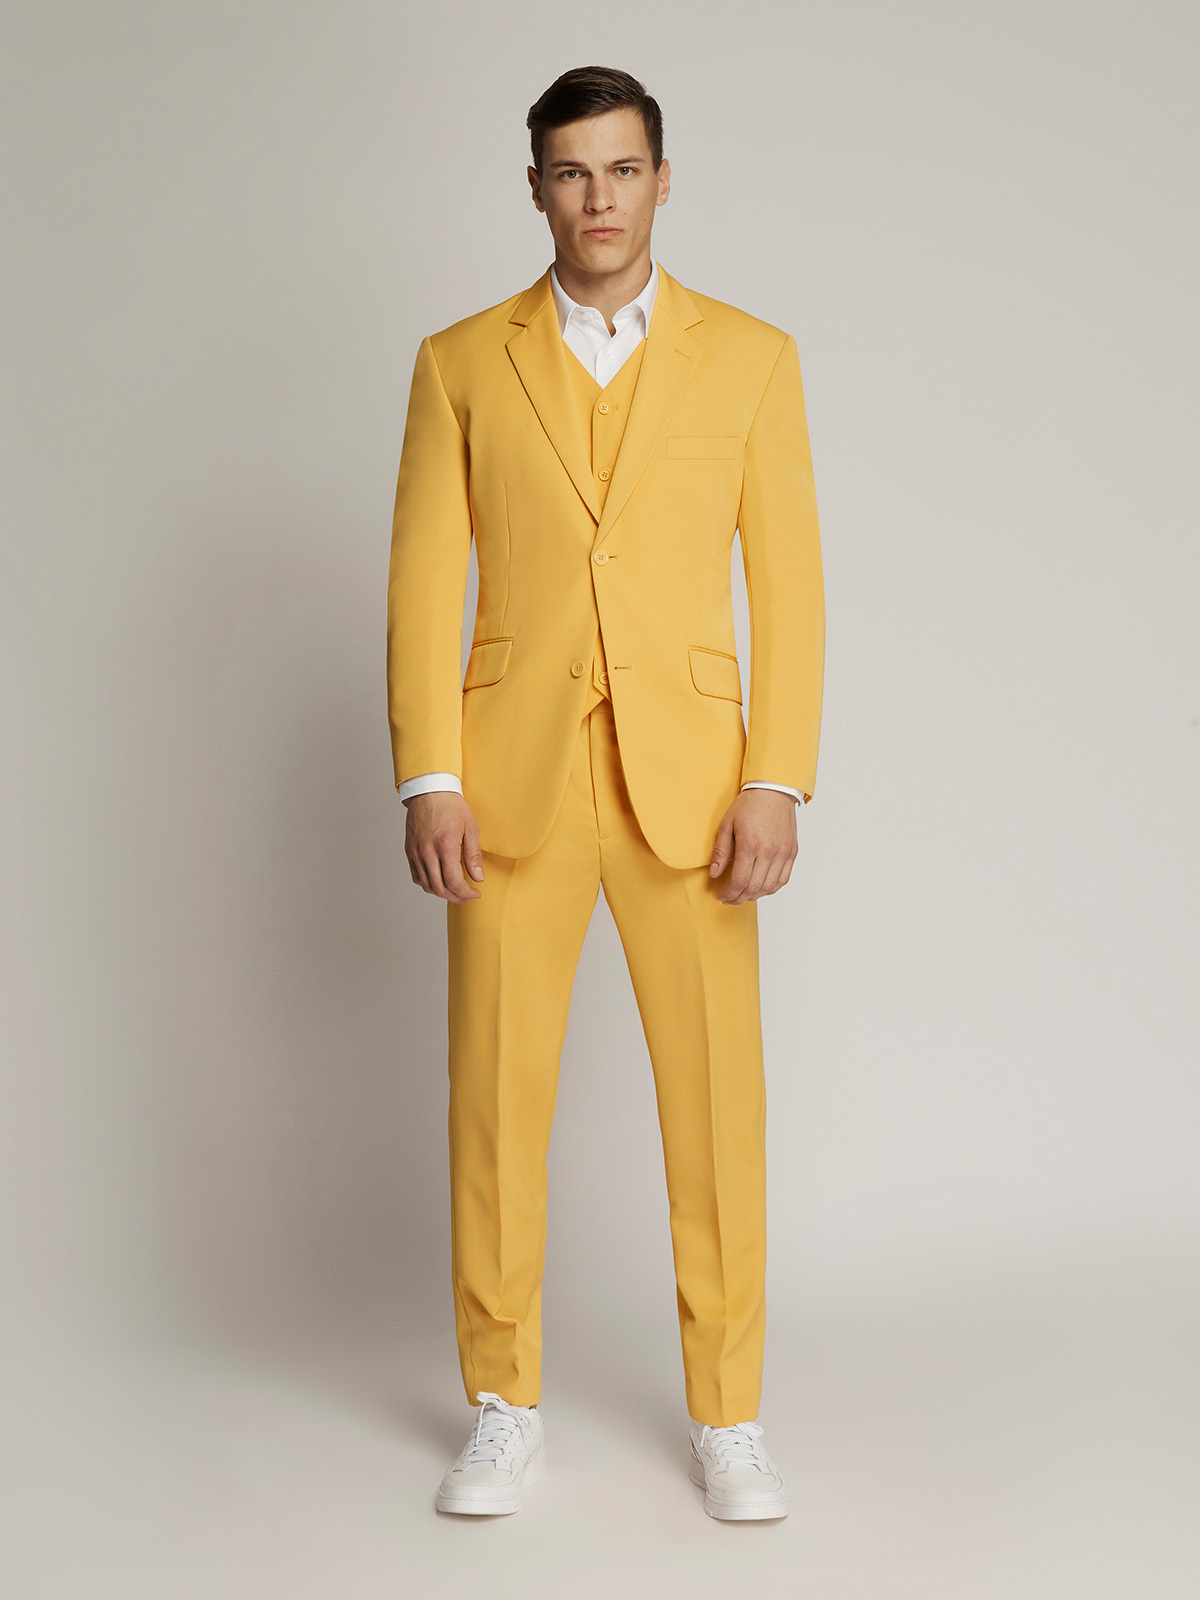 Buy Allen Solly Yellow Slim Fit Two Piece Suit for Mens Online @ Tata CLiQ